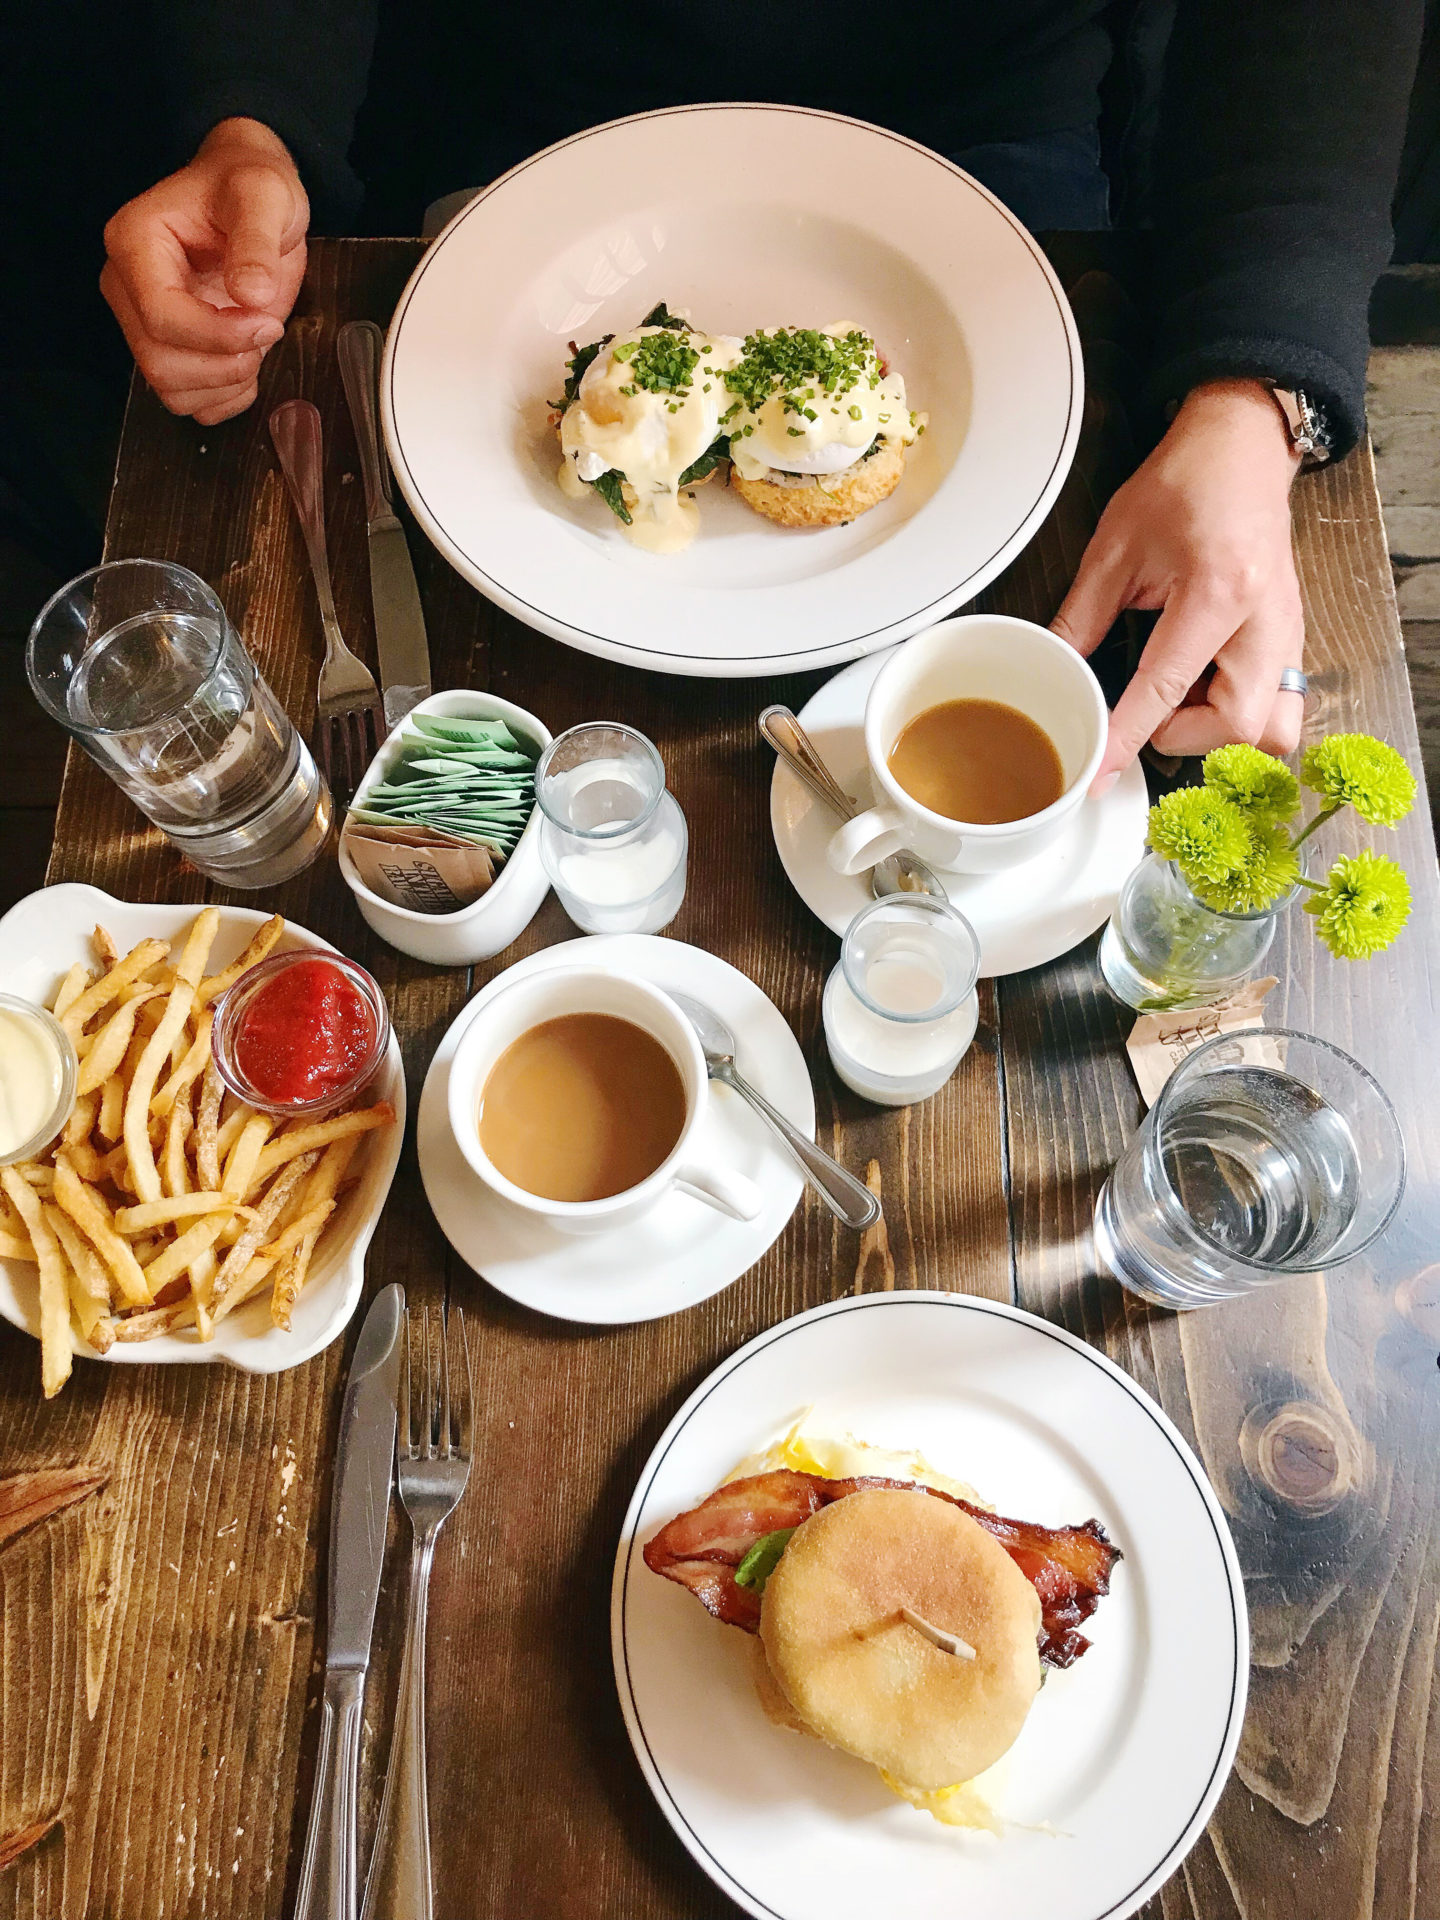 Best NYC brunch spots : Hudson Clearwater. A must read! An NYC restaurant guide featuring all of New York City's best restaurants, from brunch to late night dinners. It even details key dishes to try at each restaurant!